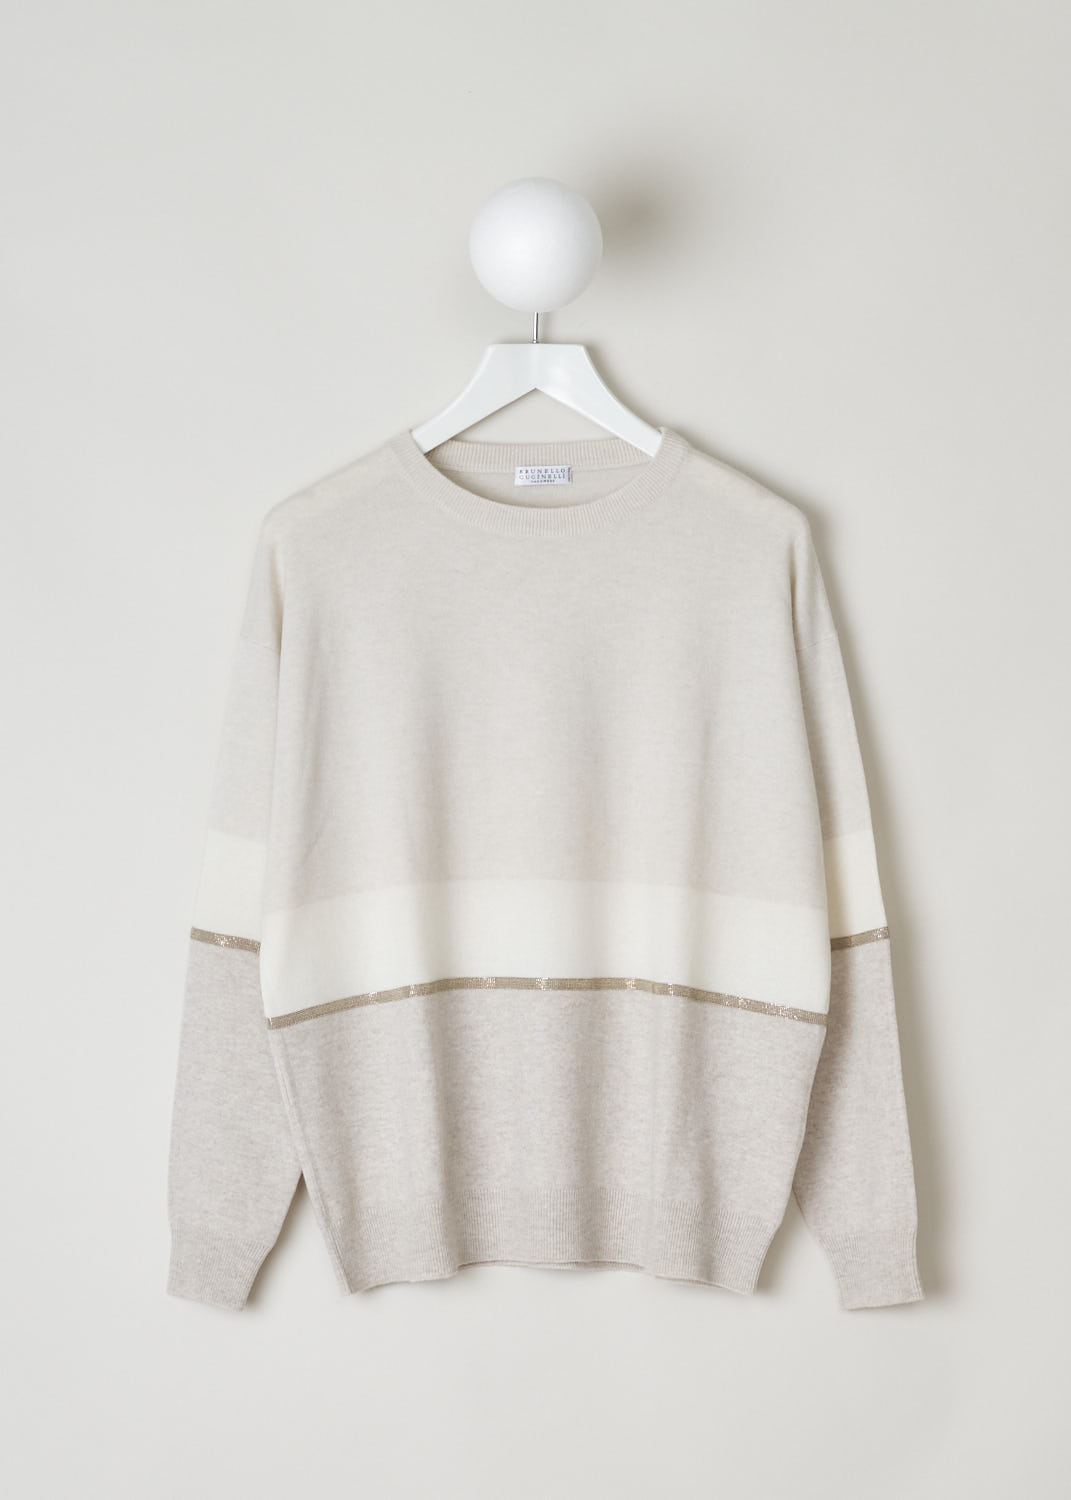 BRUNELLO CUCINELLI, THREE-TONE SWEATER WITH BEADED DETAILING, Beige, Front, Three-tone sweater in white and pale grey tones with bead-embellished trims. The sweater features long sleeves and has a ribbed hem. 
